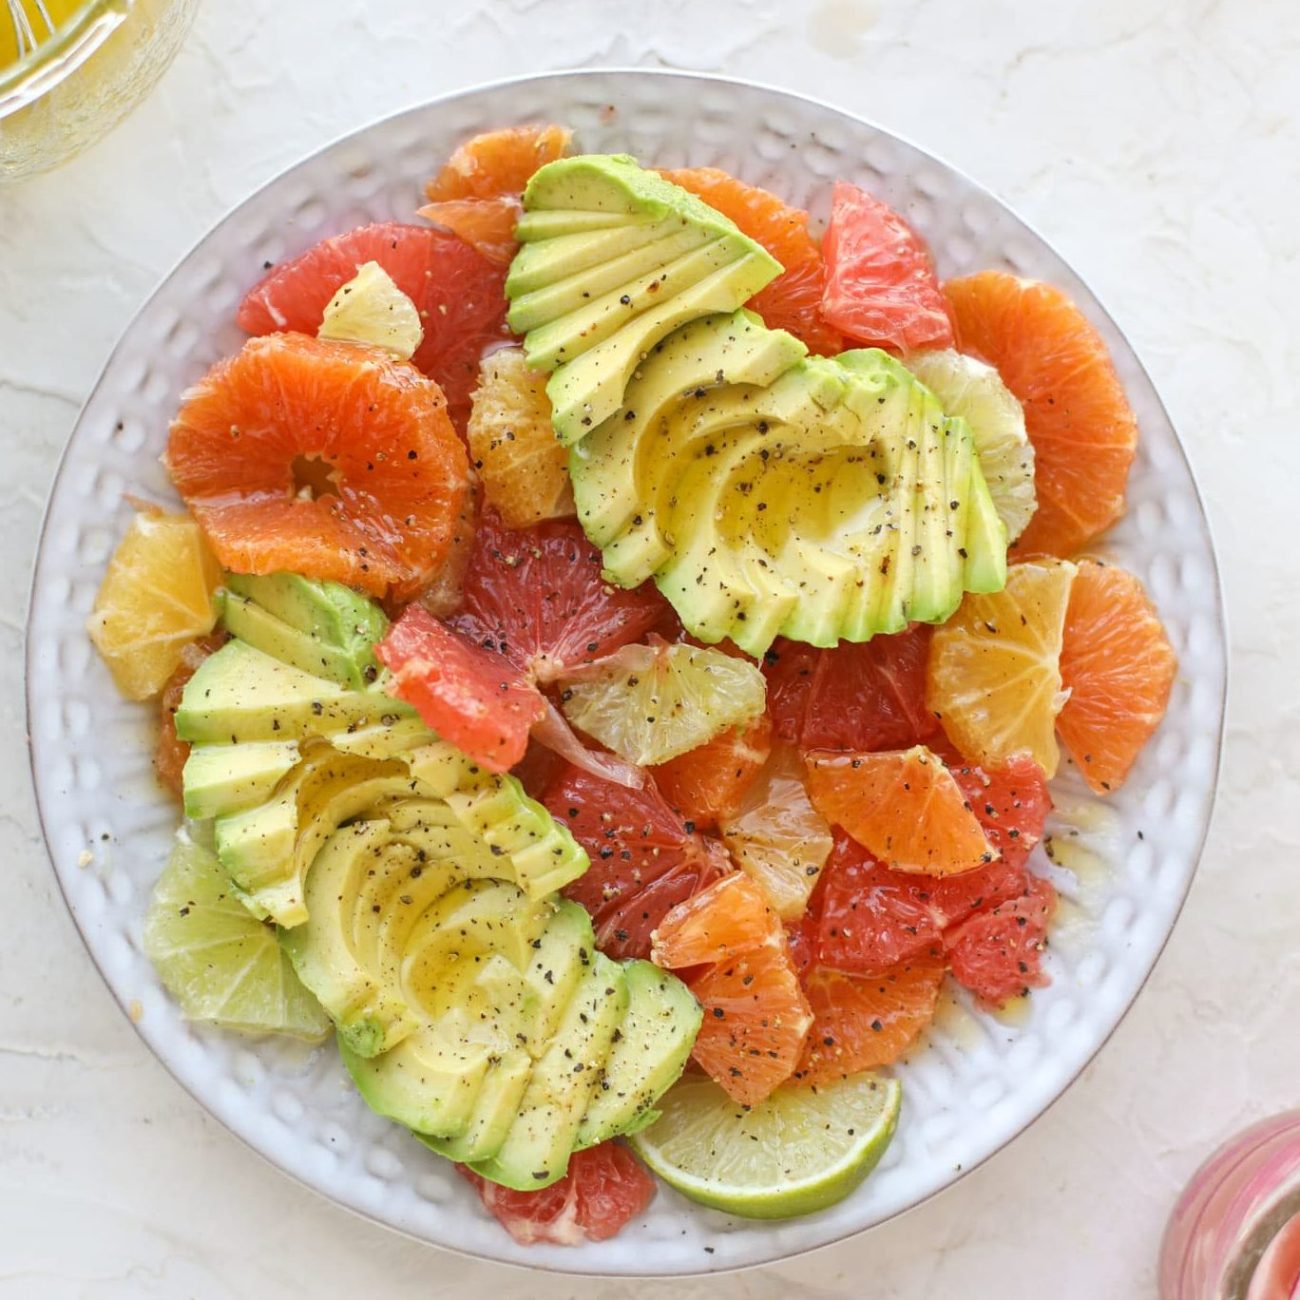 Avocado With Grapefruit And Sweet-Onion